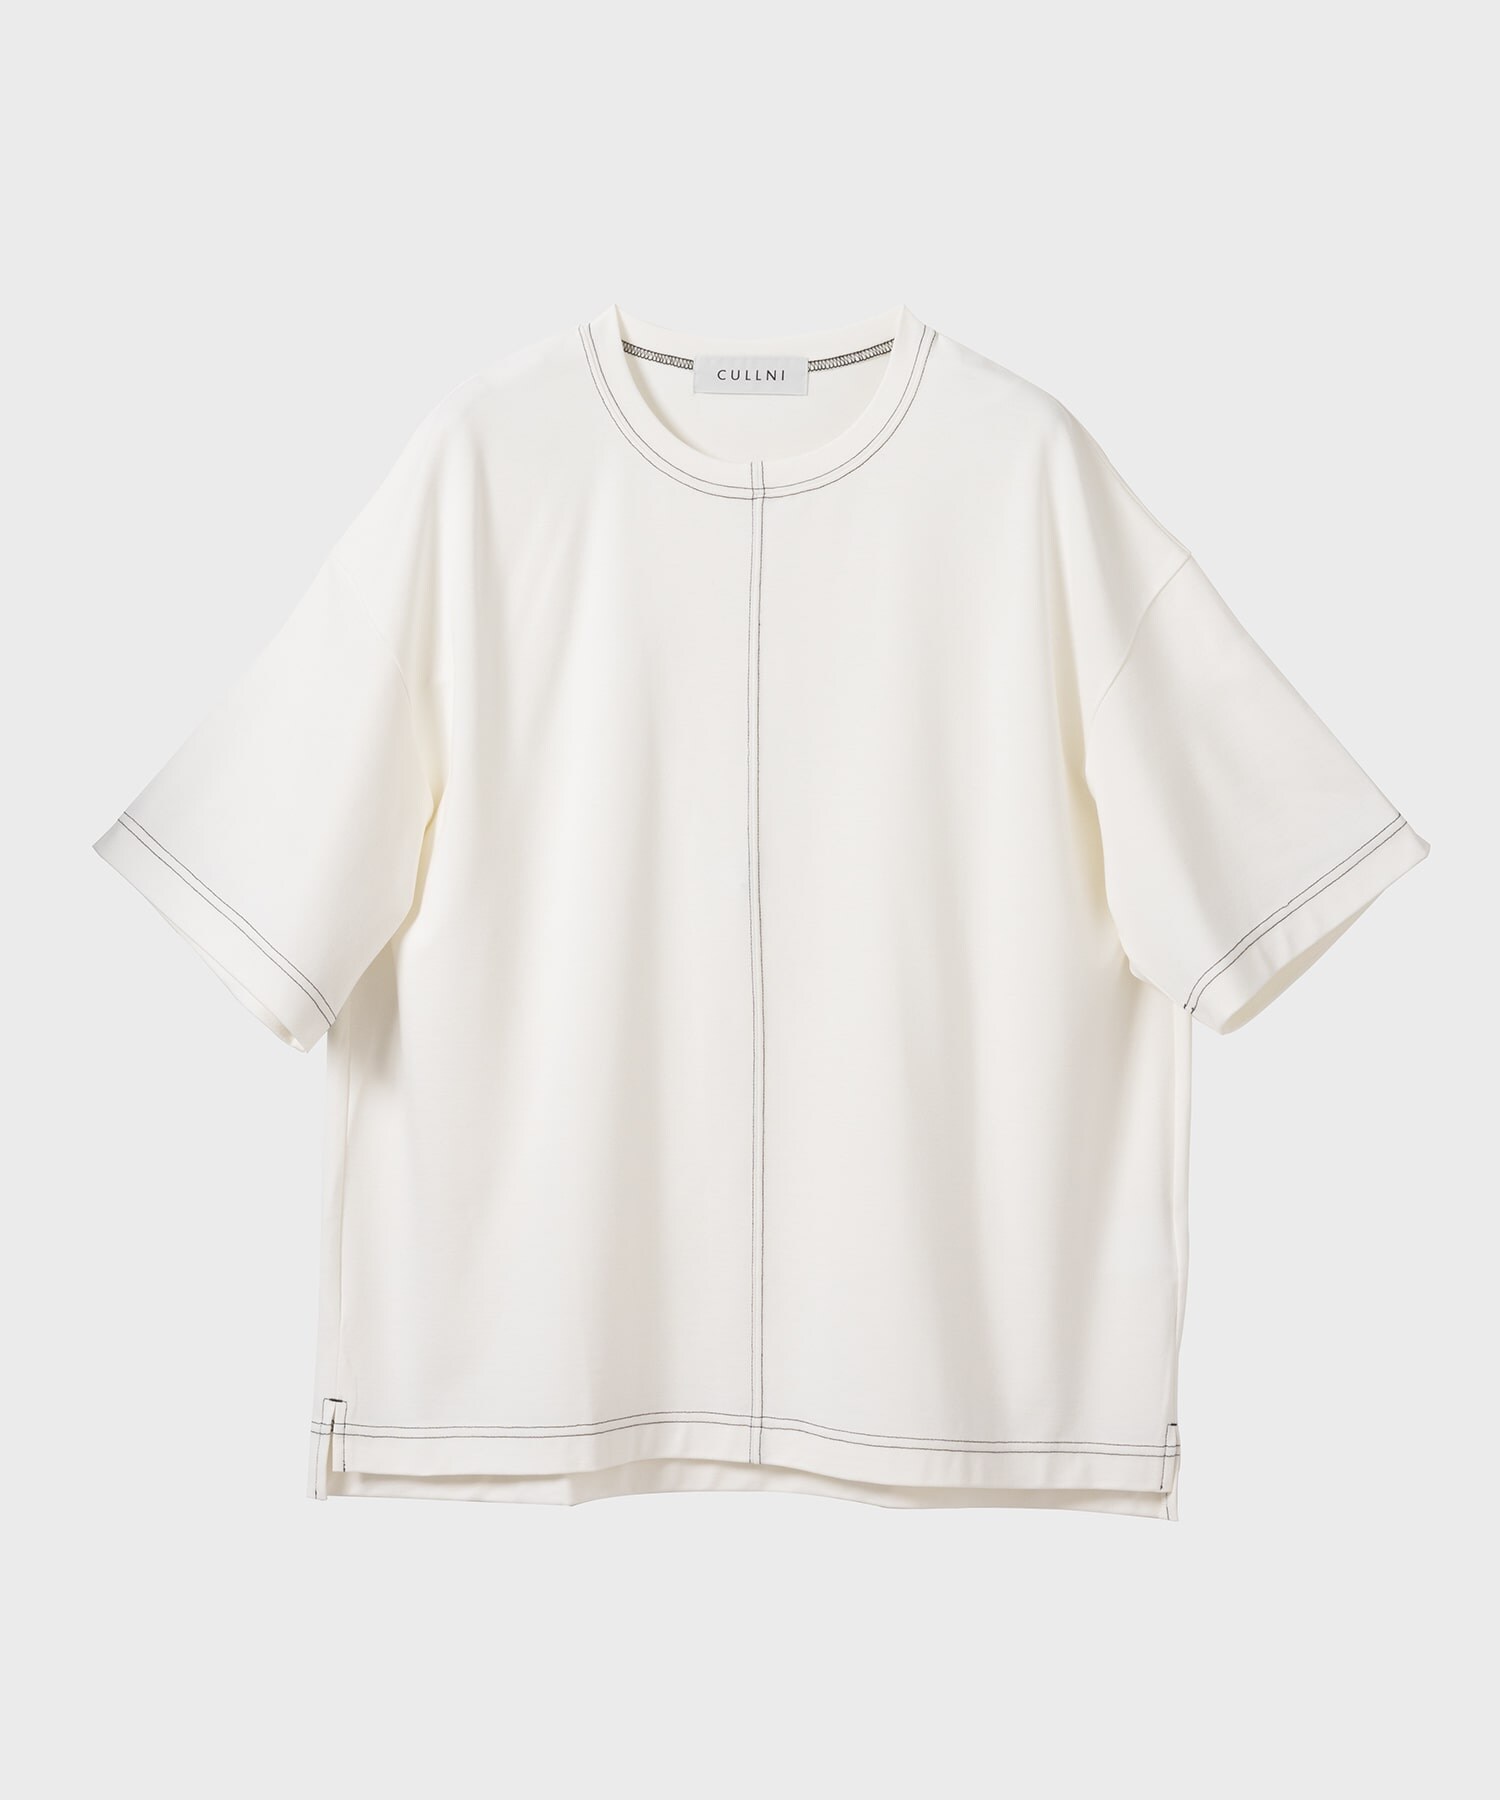 Contrast Stetch Tee